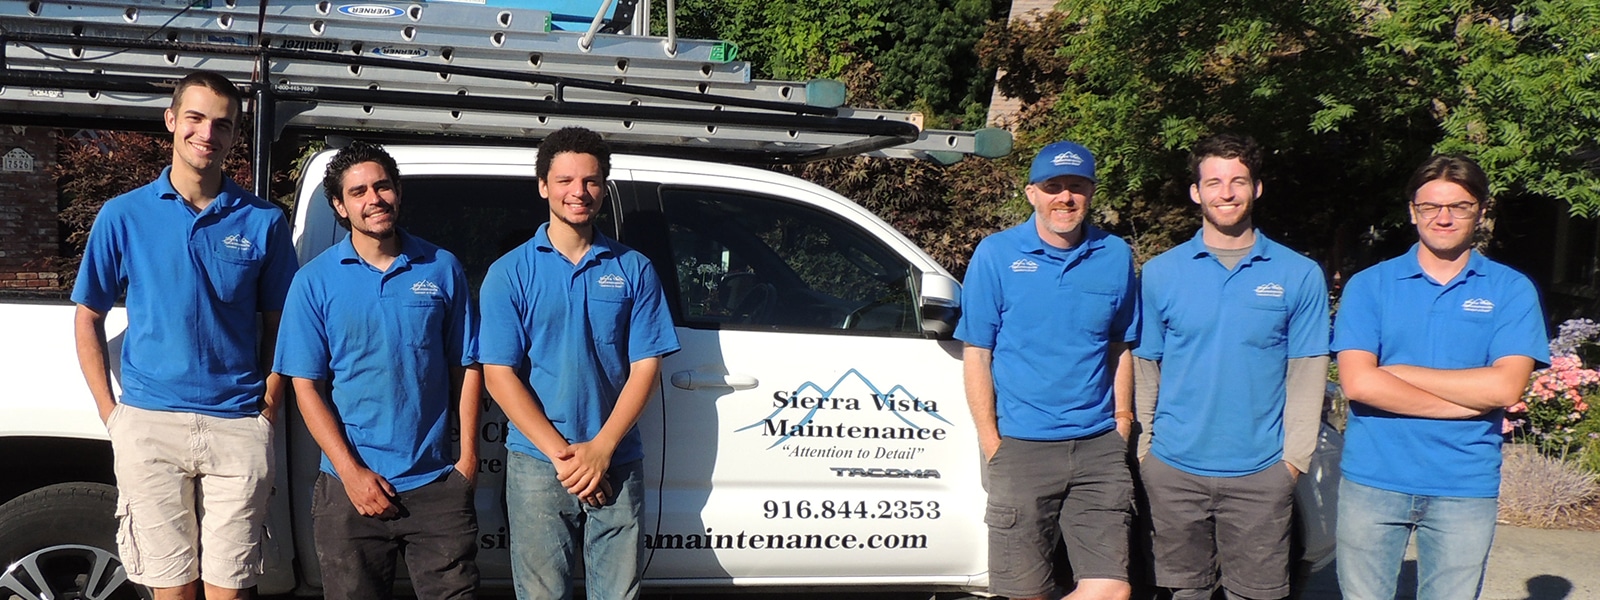 Sierra Vista Maintenance Sacramento CA Cleaning Company Sacramento commercial residential Cleaning services service area central california